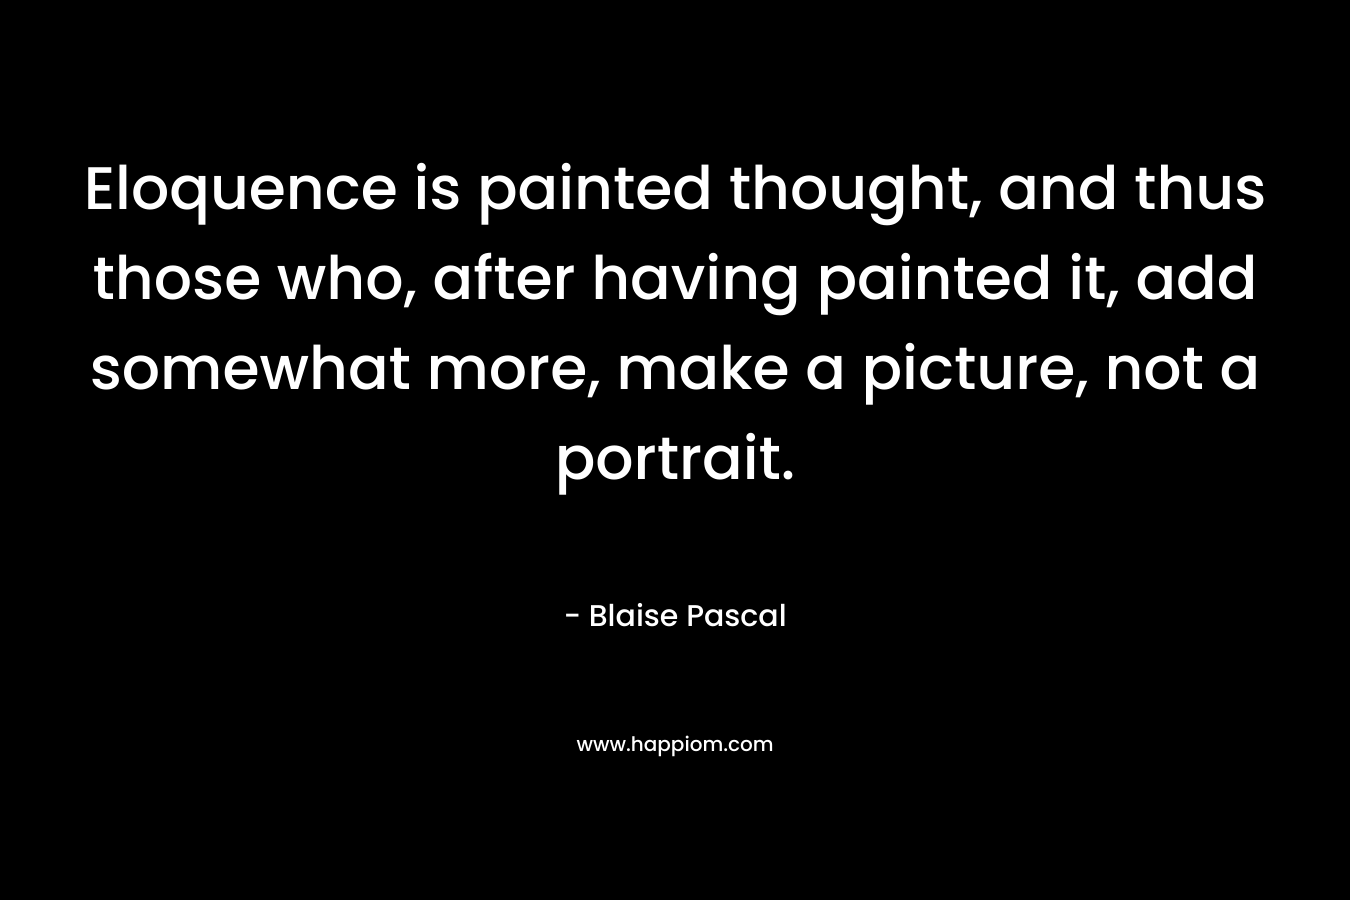 Eloquence is painted thought, and thus those who, after having painted it, add somewhat more, make a picture, not a portrait. – Blaise Pascal